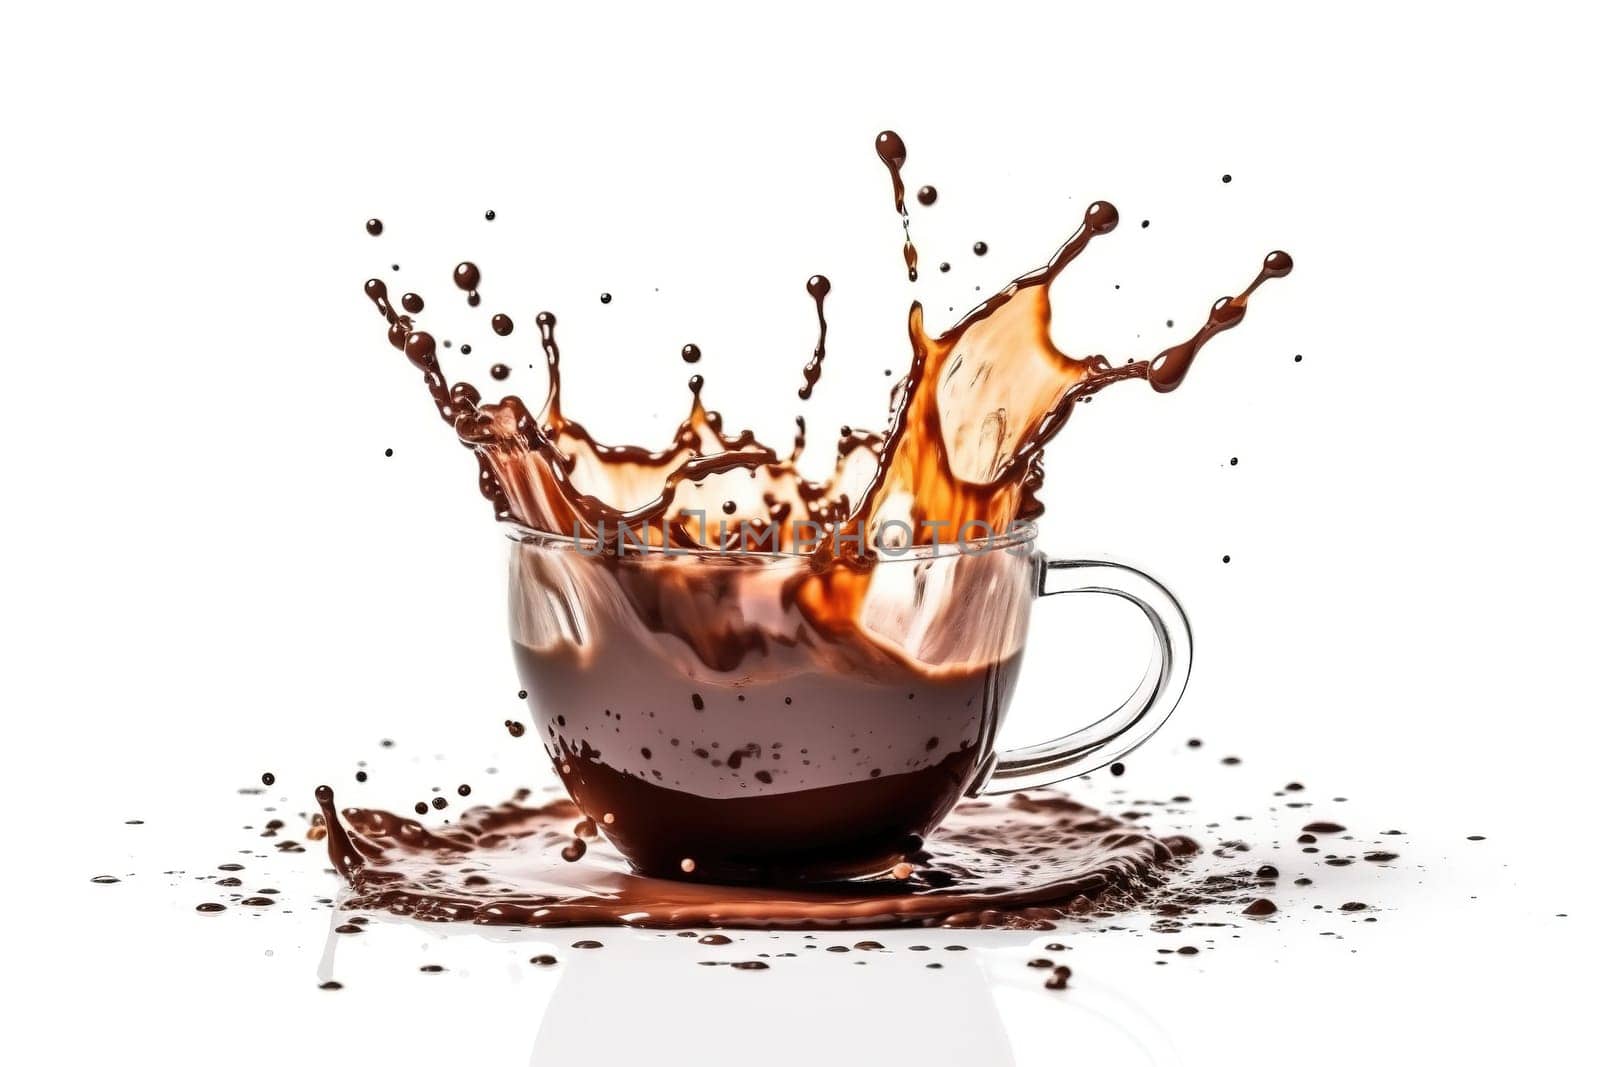 splashes of hot chocolate in a transparent cup by GekaSkr